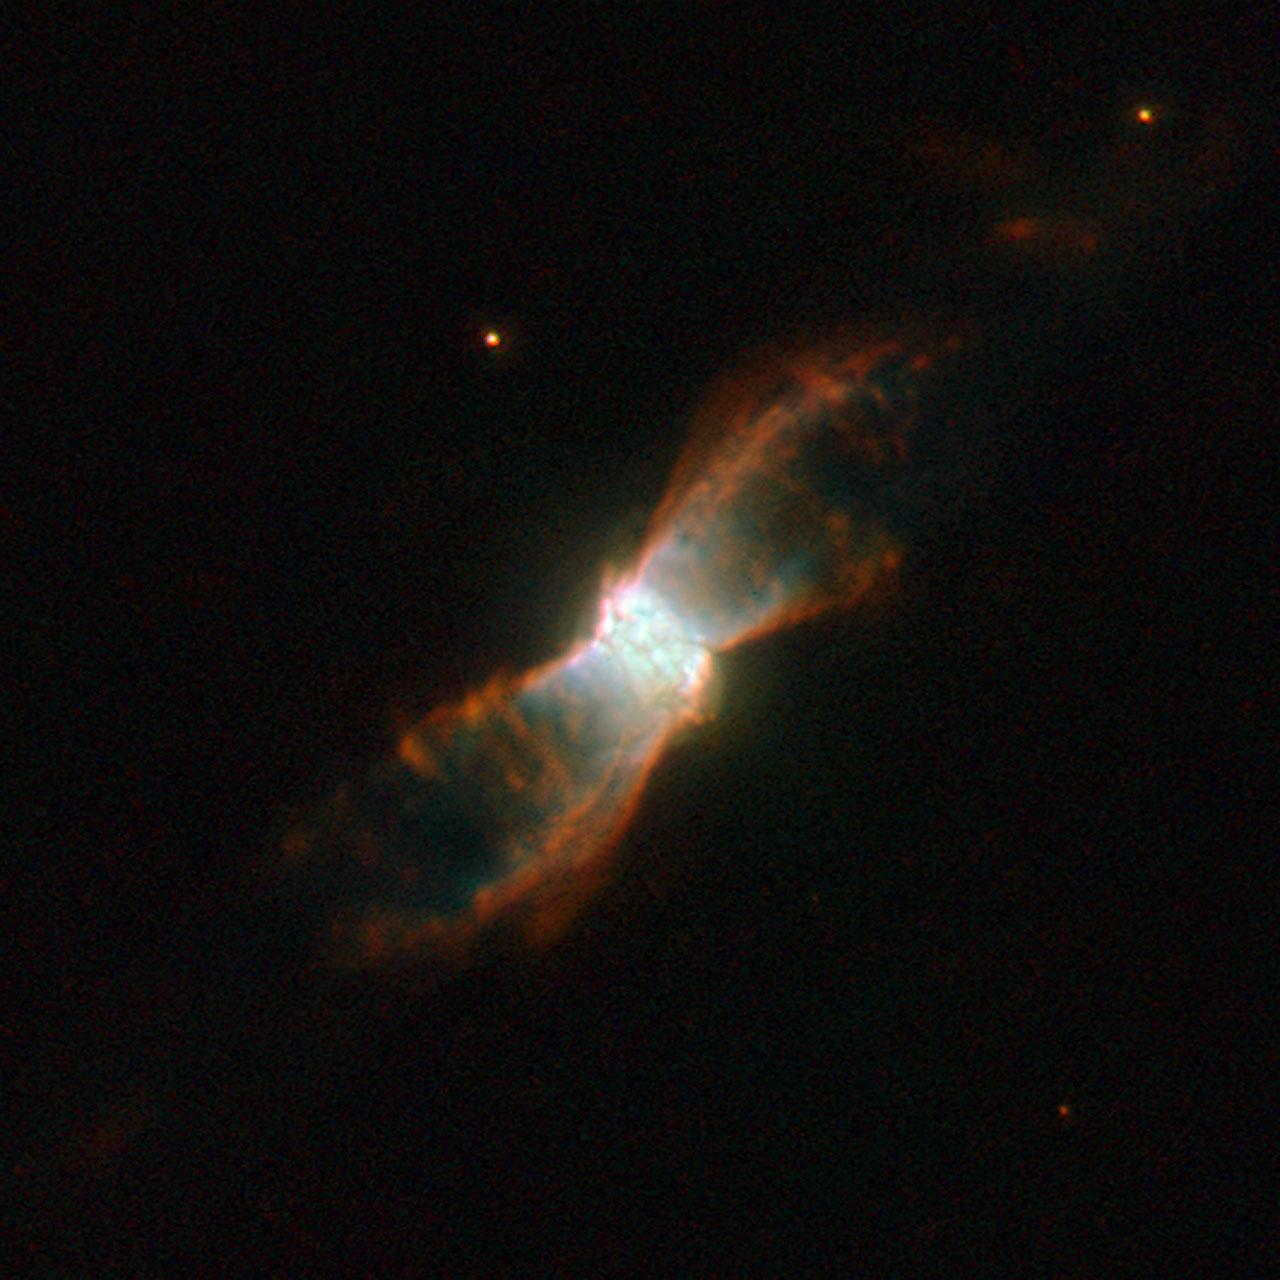 The breathtaking butterfly-like planetary nebula NGC 6881 is visible here in an image taken by the NASA/ESA Hubble Space Telescope. Located in the constellation of Cygnus, it is formed of an inner nebula, estimated to be about one fifth of a light-year across, and symmetrical “wings” that spread out about one light-year from one tip to the other. The symmetry could be due to a binary star at the nebula’s centre. NGC 6881 has a dying star at its core which is about 60% of the mass of the Sun. It is an example of a quadrupolar planetary nebula, made from two pairs of bipolar lobes pointing in different directions, and consisting of four pairs of flat rings. There are also three rings in the centre. A planetary nebula is a cloud of ionised gas, emitting light of various colours. It typically forms when a dying star — a red giant — throws off its outer layers, because of pulsations and strong stellar winds. The star’s exposed hot, luminous core starts emitting ultraviolet radiation, exciting the outer layers of the star, which then become a newly born planetary nebula. At some point, the nebula is bound to dissolve in space, leaving the central star as a white dwarf — the final evolutionary state of stars. The name “planetary” dates back to the 18th century, when such nebulae were first discovered — and when viewed through small optical telescopes, they looked a lot like giant planets. Planetary nebulae usually live for a few tens of thousands of years, a short phase in the lifetime of a star. The image was taken through three filters which isolate the specific wavelength of light emitted by nitrogen (shown in red), hydrogen (shown in green) and oxygen (shown in blue).